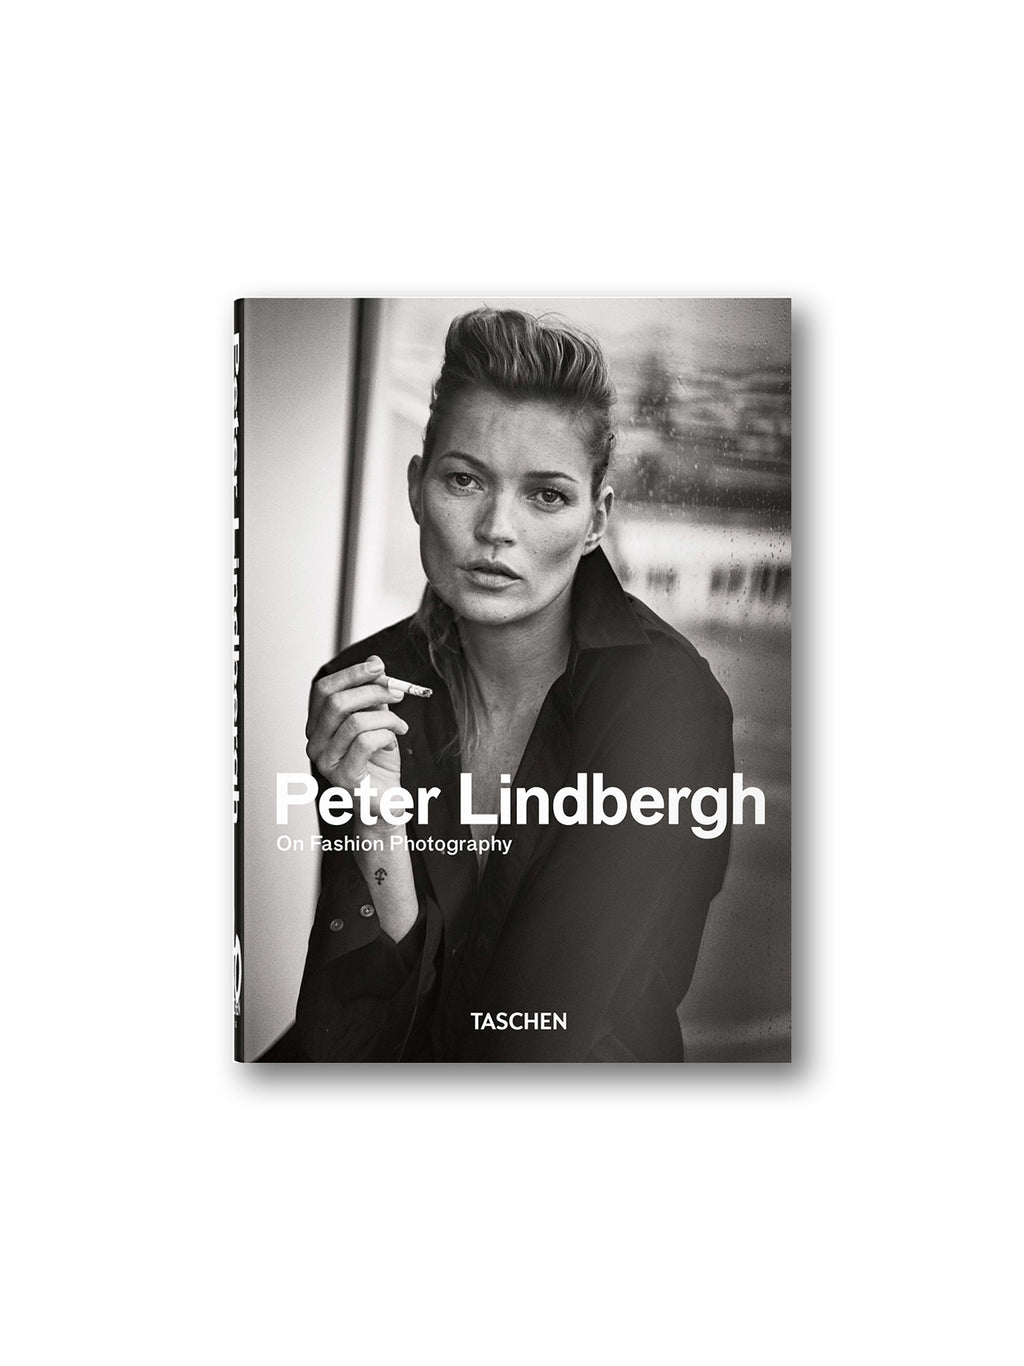 Peter Lindbergh On Fashion Photography - 40th Anniversary Edition